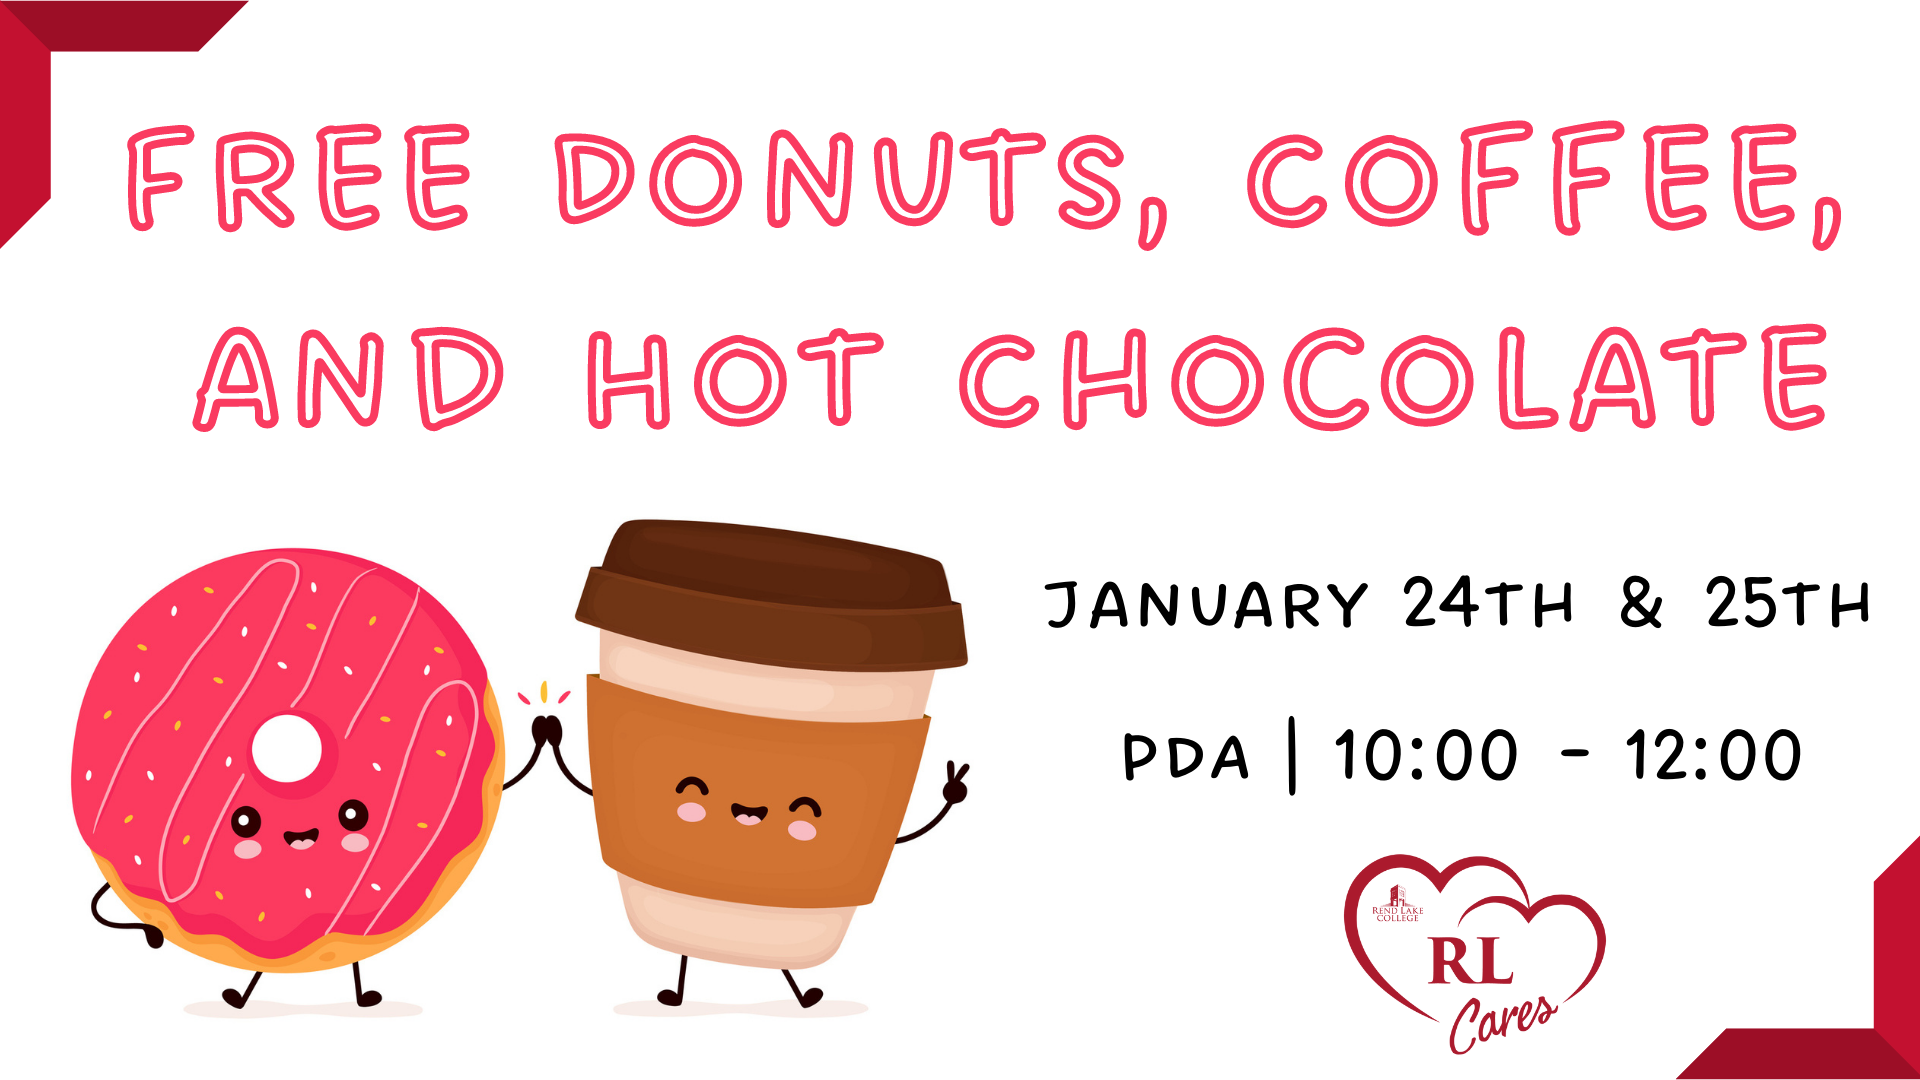 Free Donuts - RL Cares - January 24th-25th